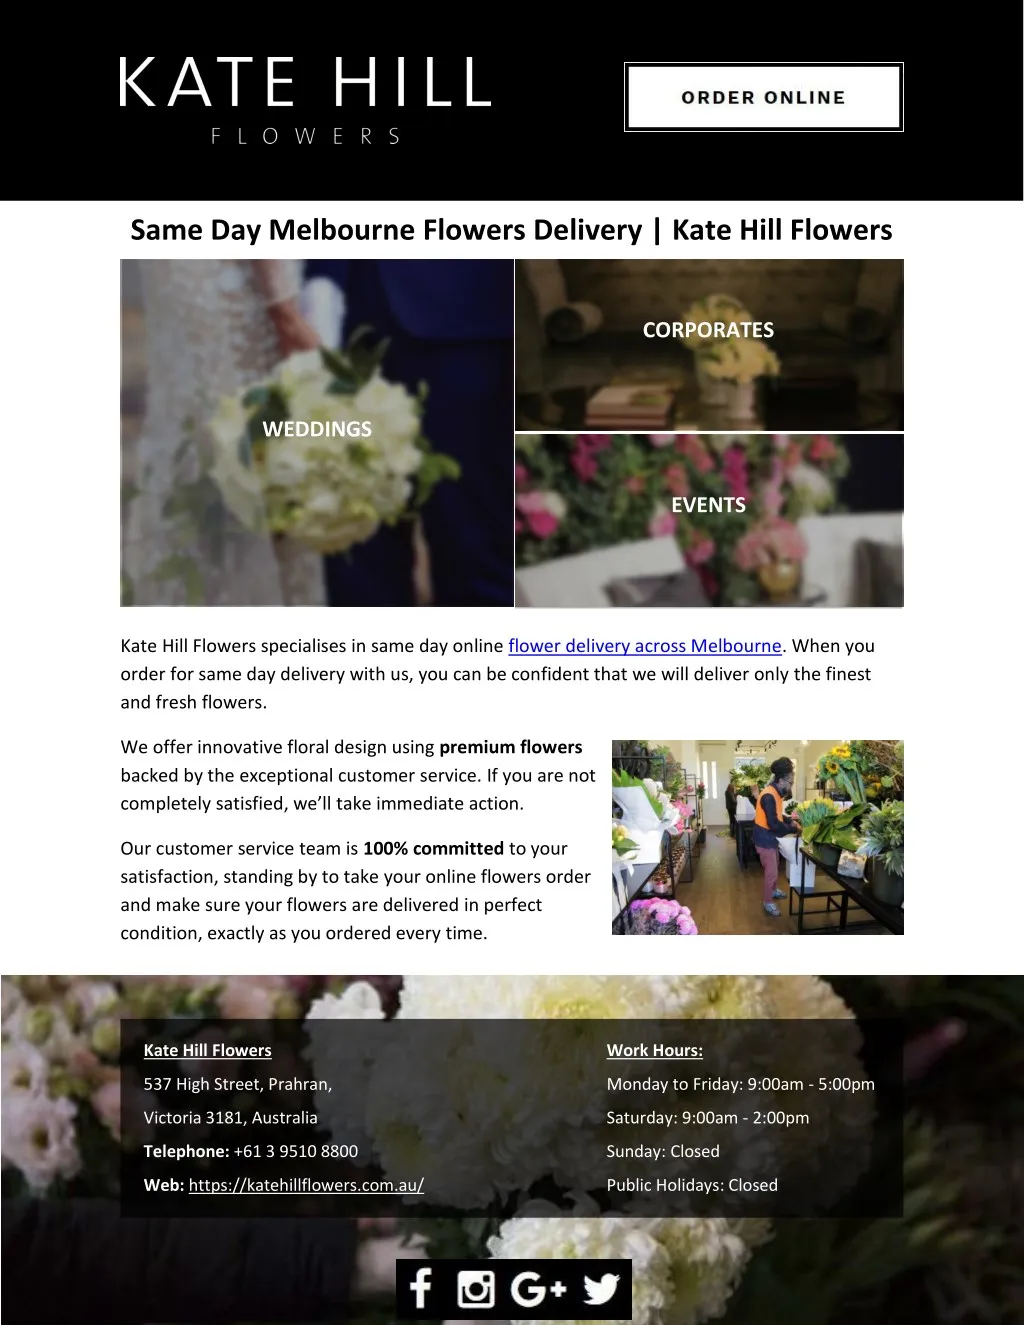 same day melbourne flowers delivery kate hill